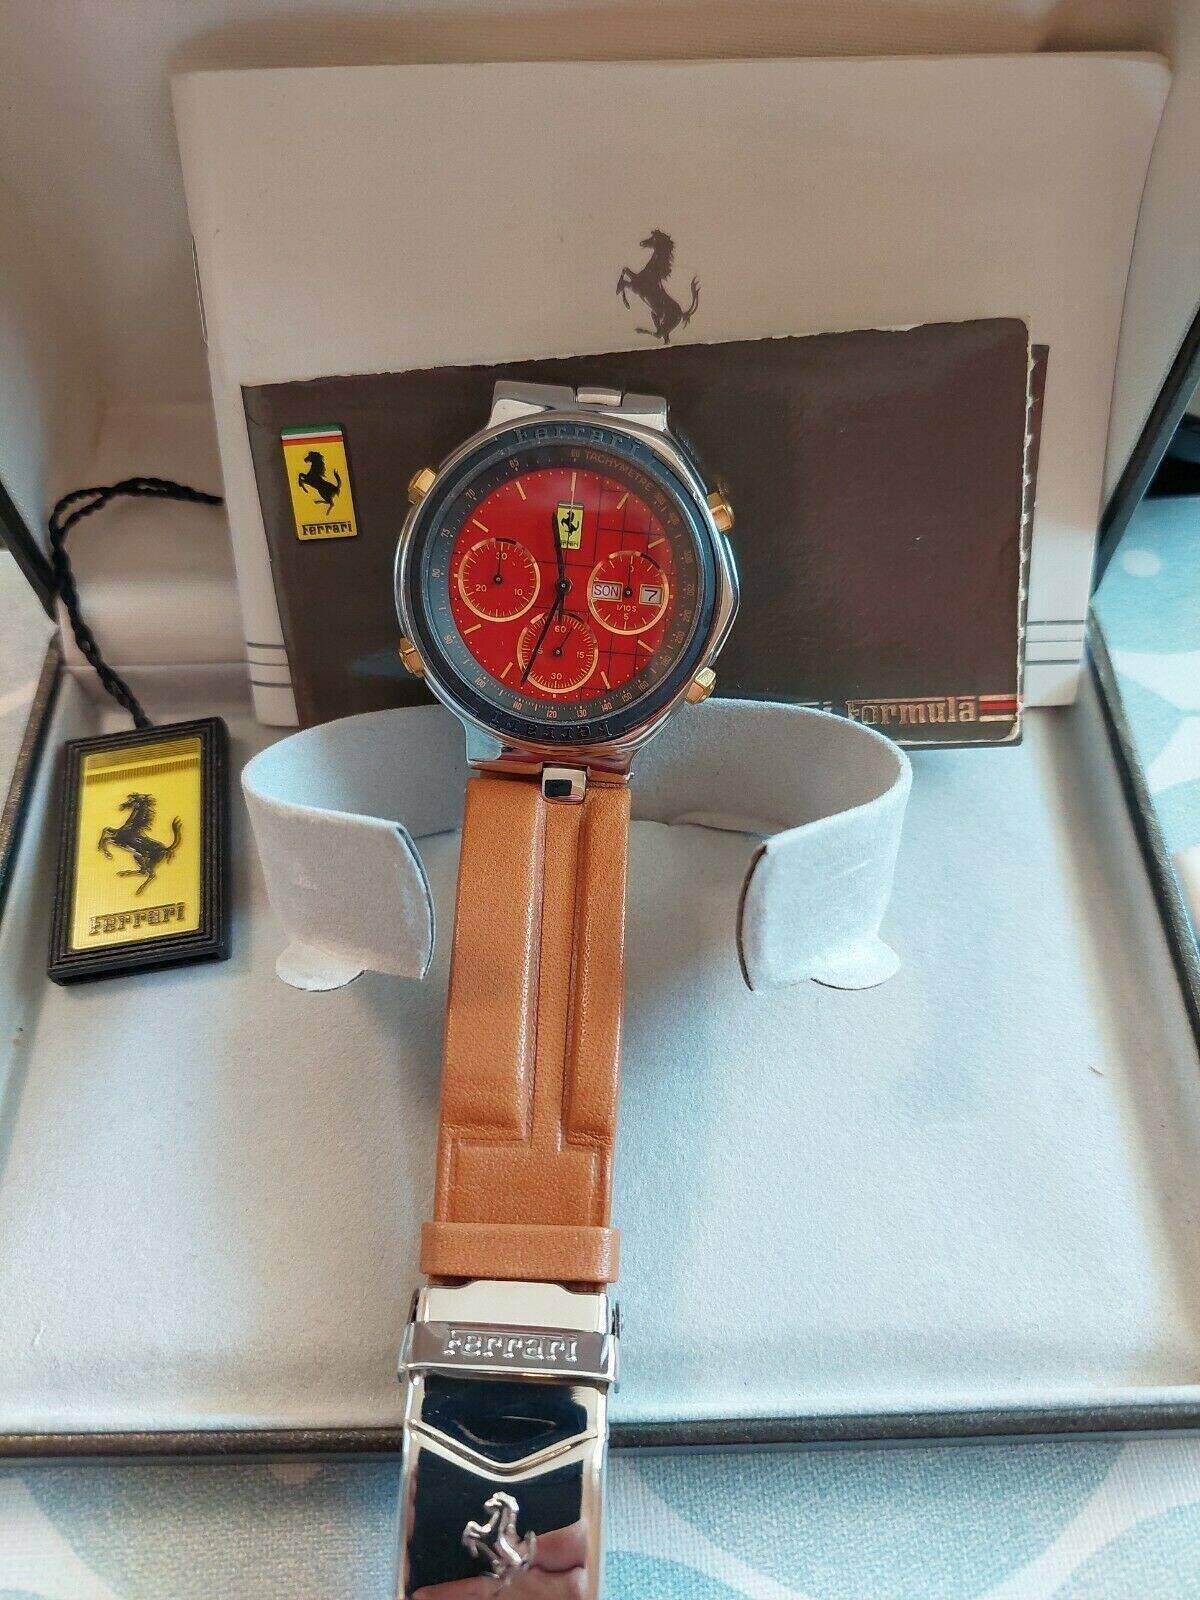 rsz_cartierff-7a38-stainless-black-redface-tanleatherstrap-ebaygermany-sept2021-2.jpg